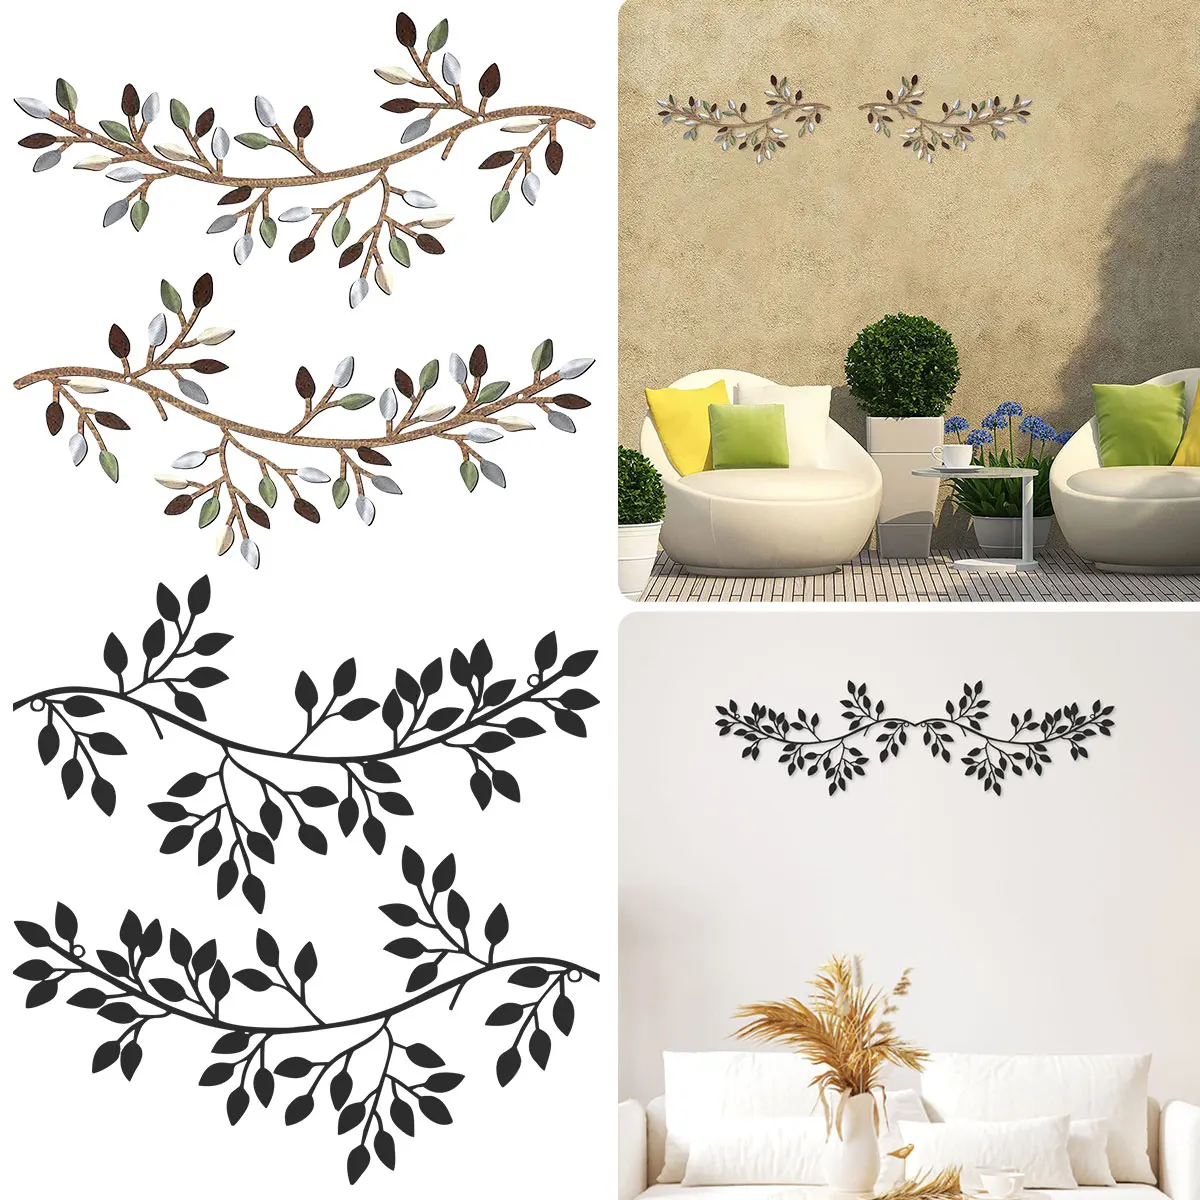 

2Pcs Metal Tree Leaf Wall Décor Vine Olive Branch Leaf Wall Art Artistic Wall Hanging Sign Decorative Wall Sculpture Sturdy Home